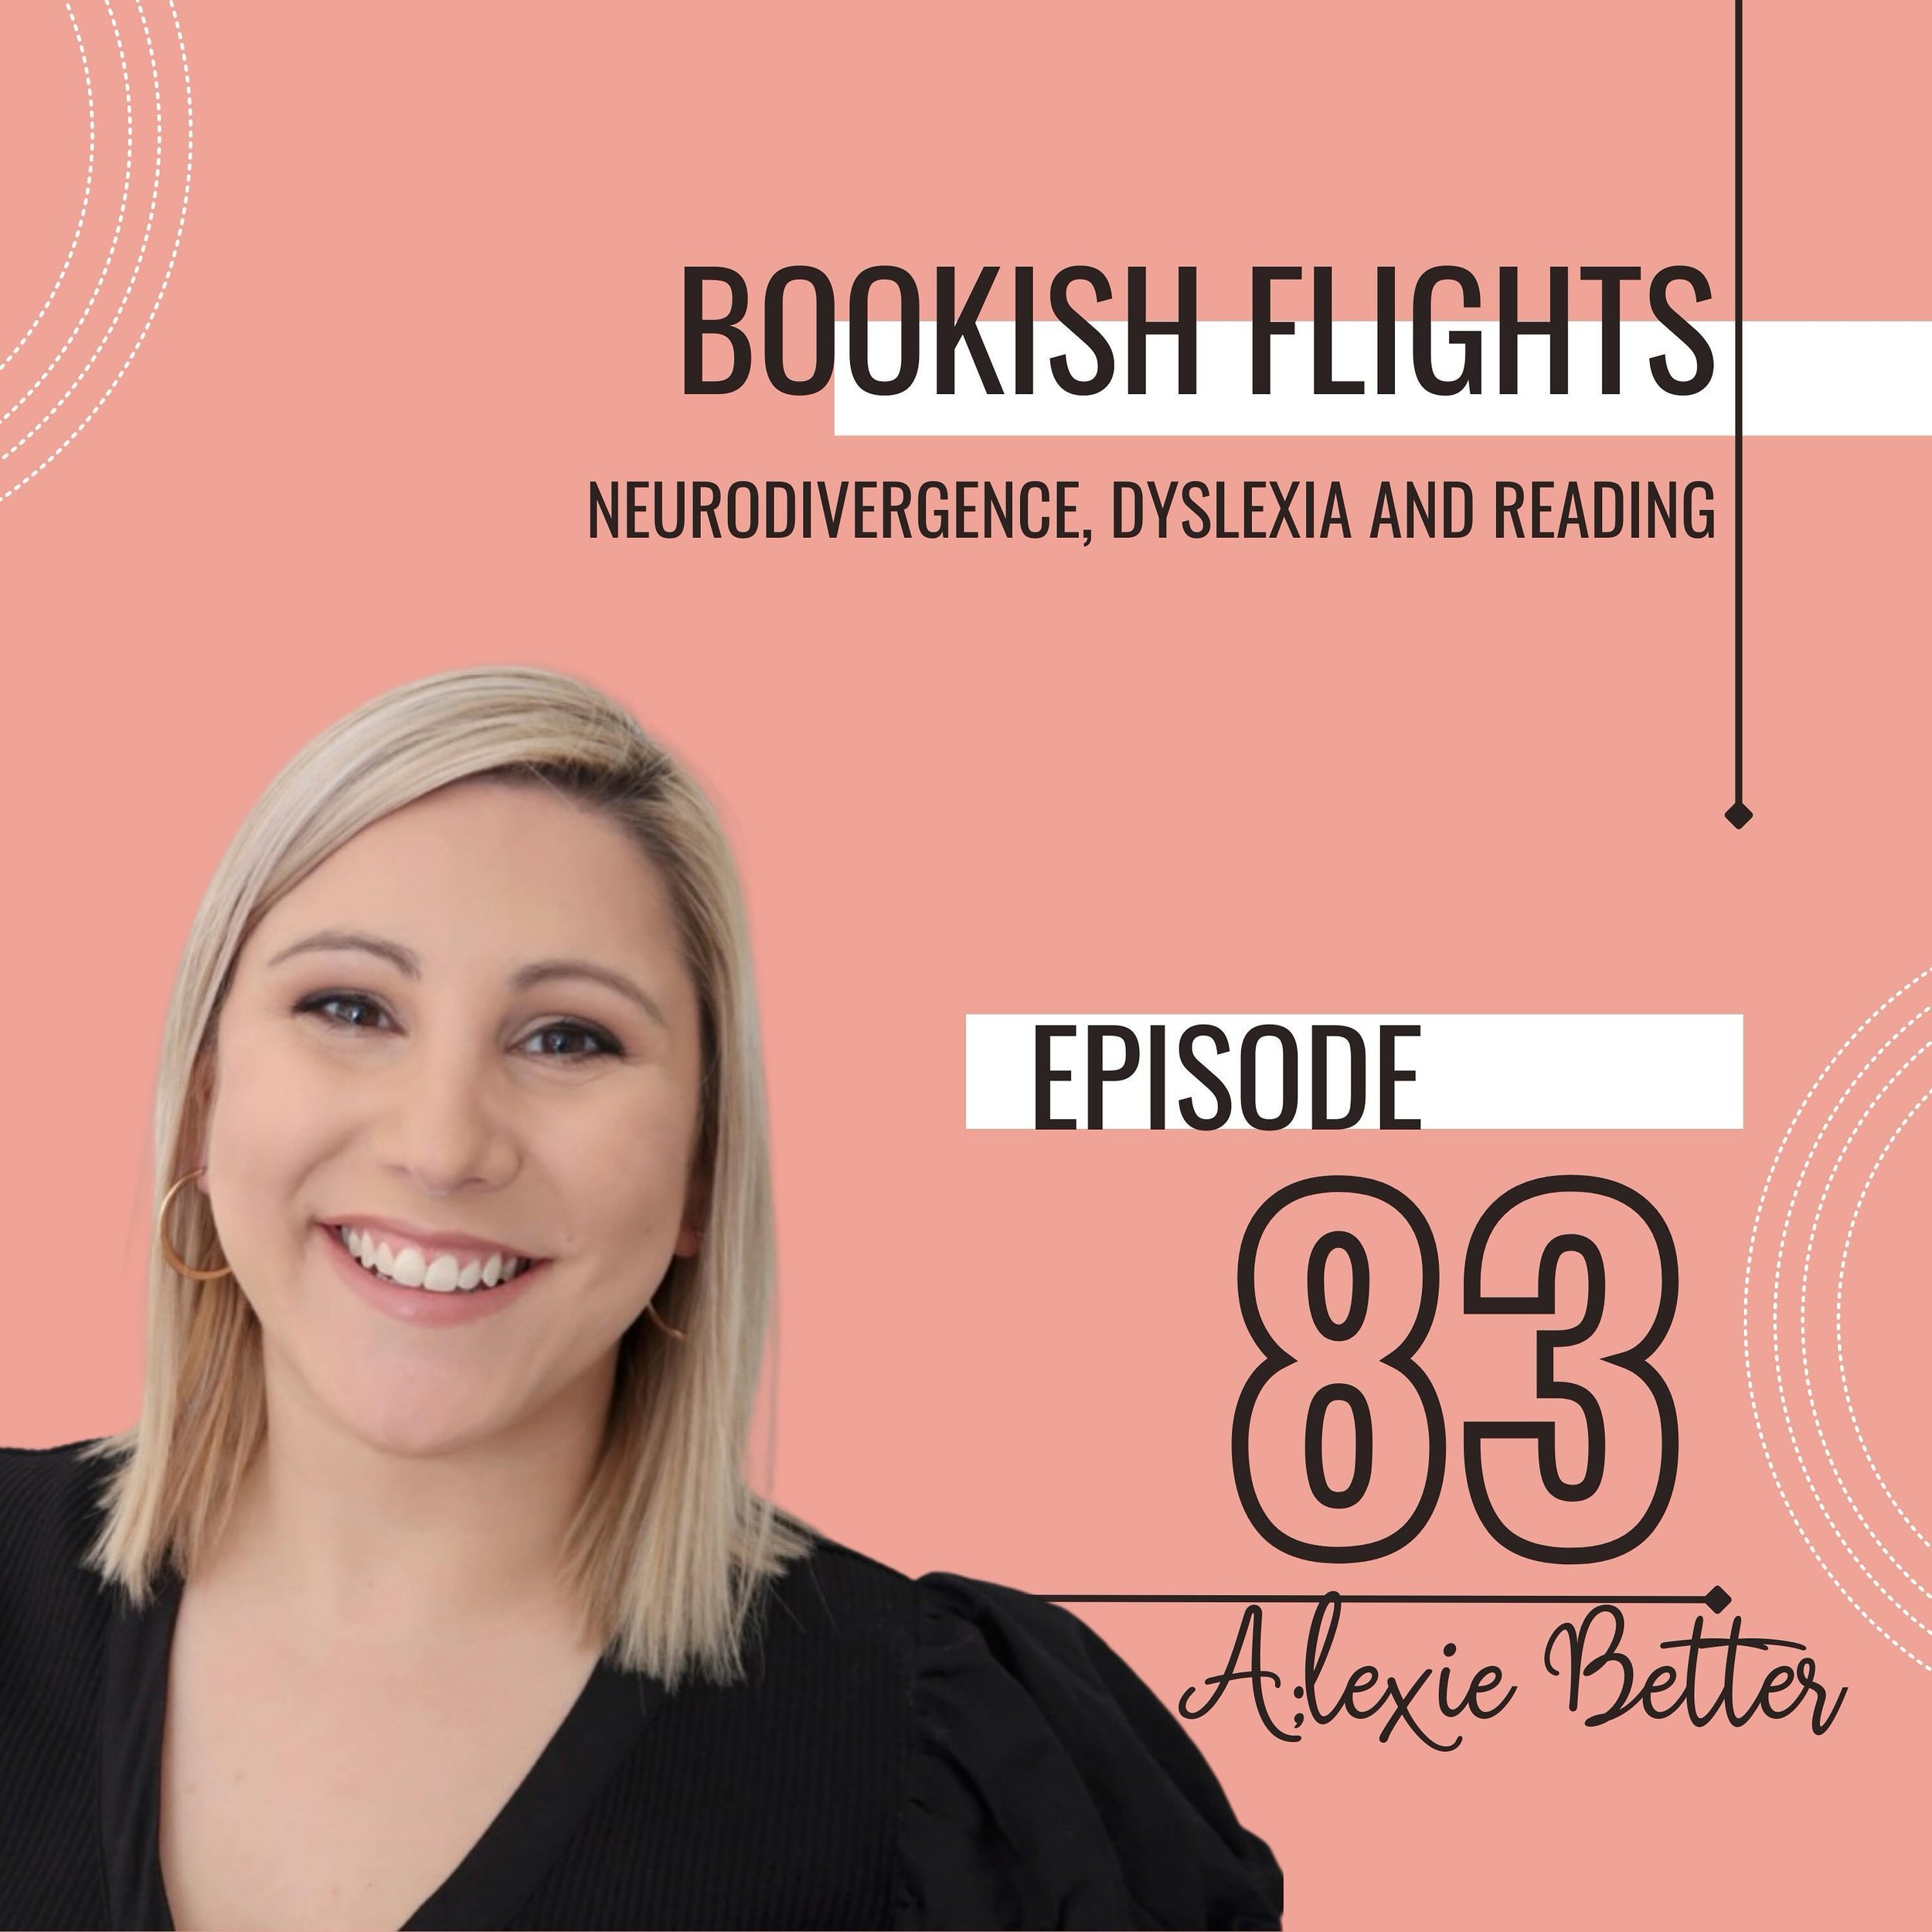 In today&rsquo;s episode I am chatting with Alexie Better. Alexie is the founder of the Better Multisensory Learning Centre in Melbourne Australia. She has over 14 years experience working as a specialist tutor, developmental educator, autism therapi